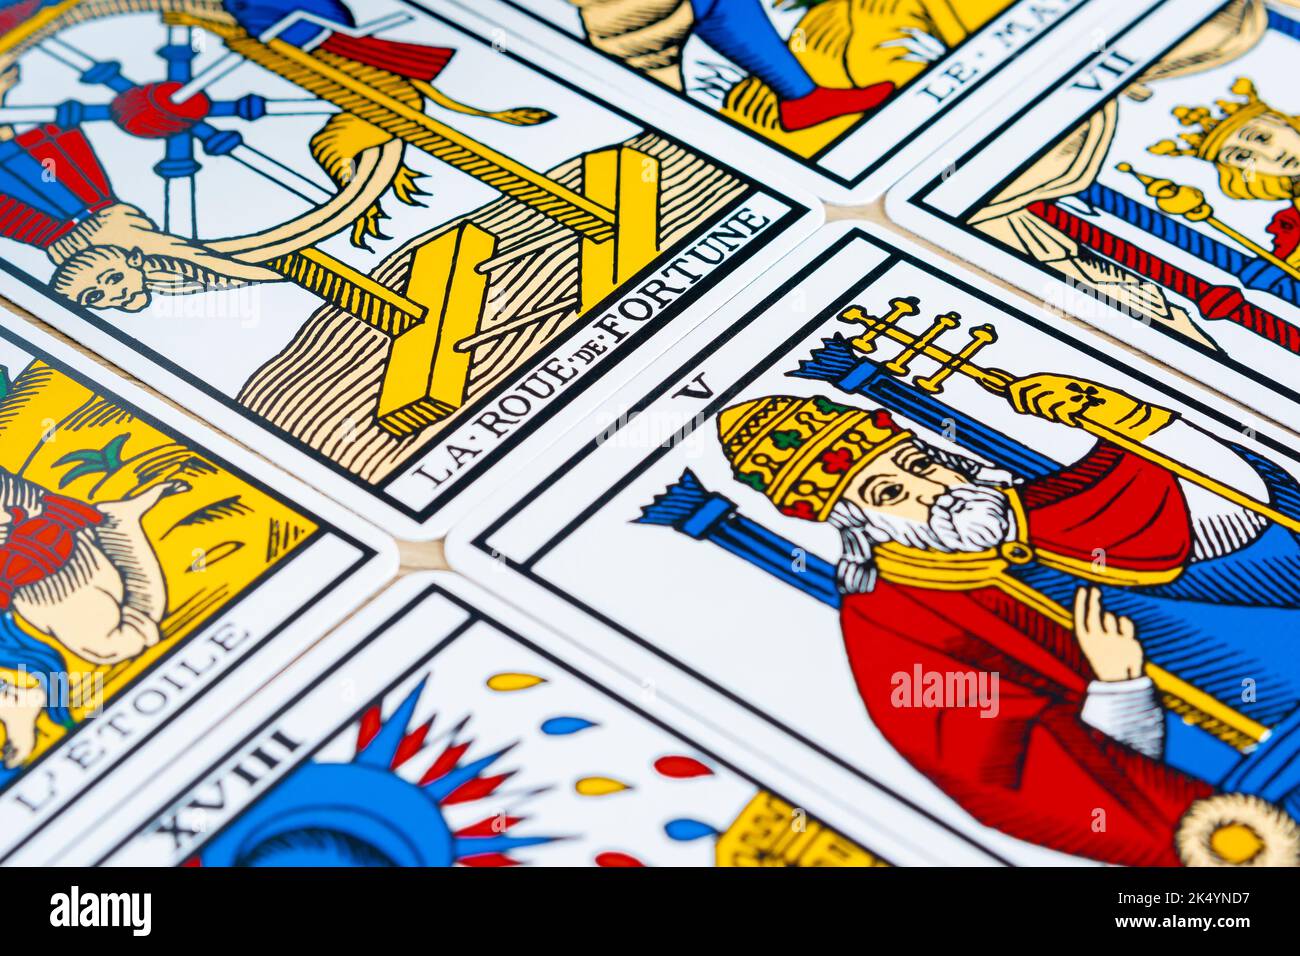 TAROT - MARSEILLES DECK. The 22 major atout, or picture cards, of the Tarot.  Marseilles design of mid 19th century, re-designed with legends in English  Stock Photo - Alamy